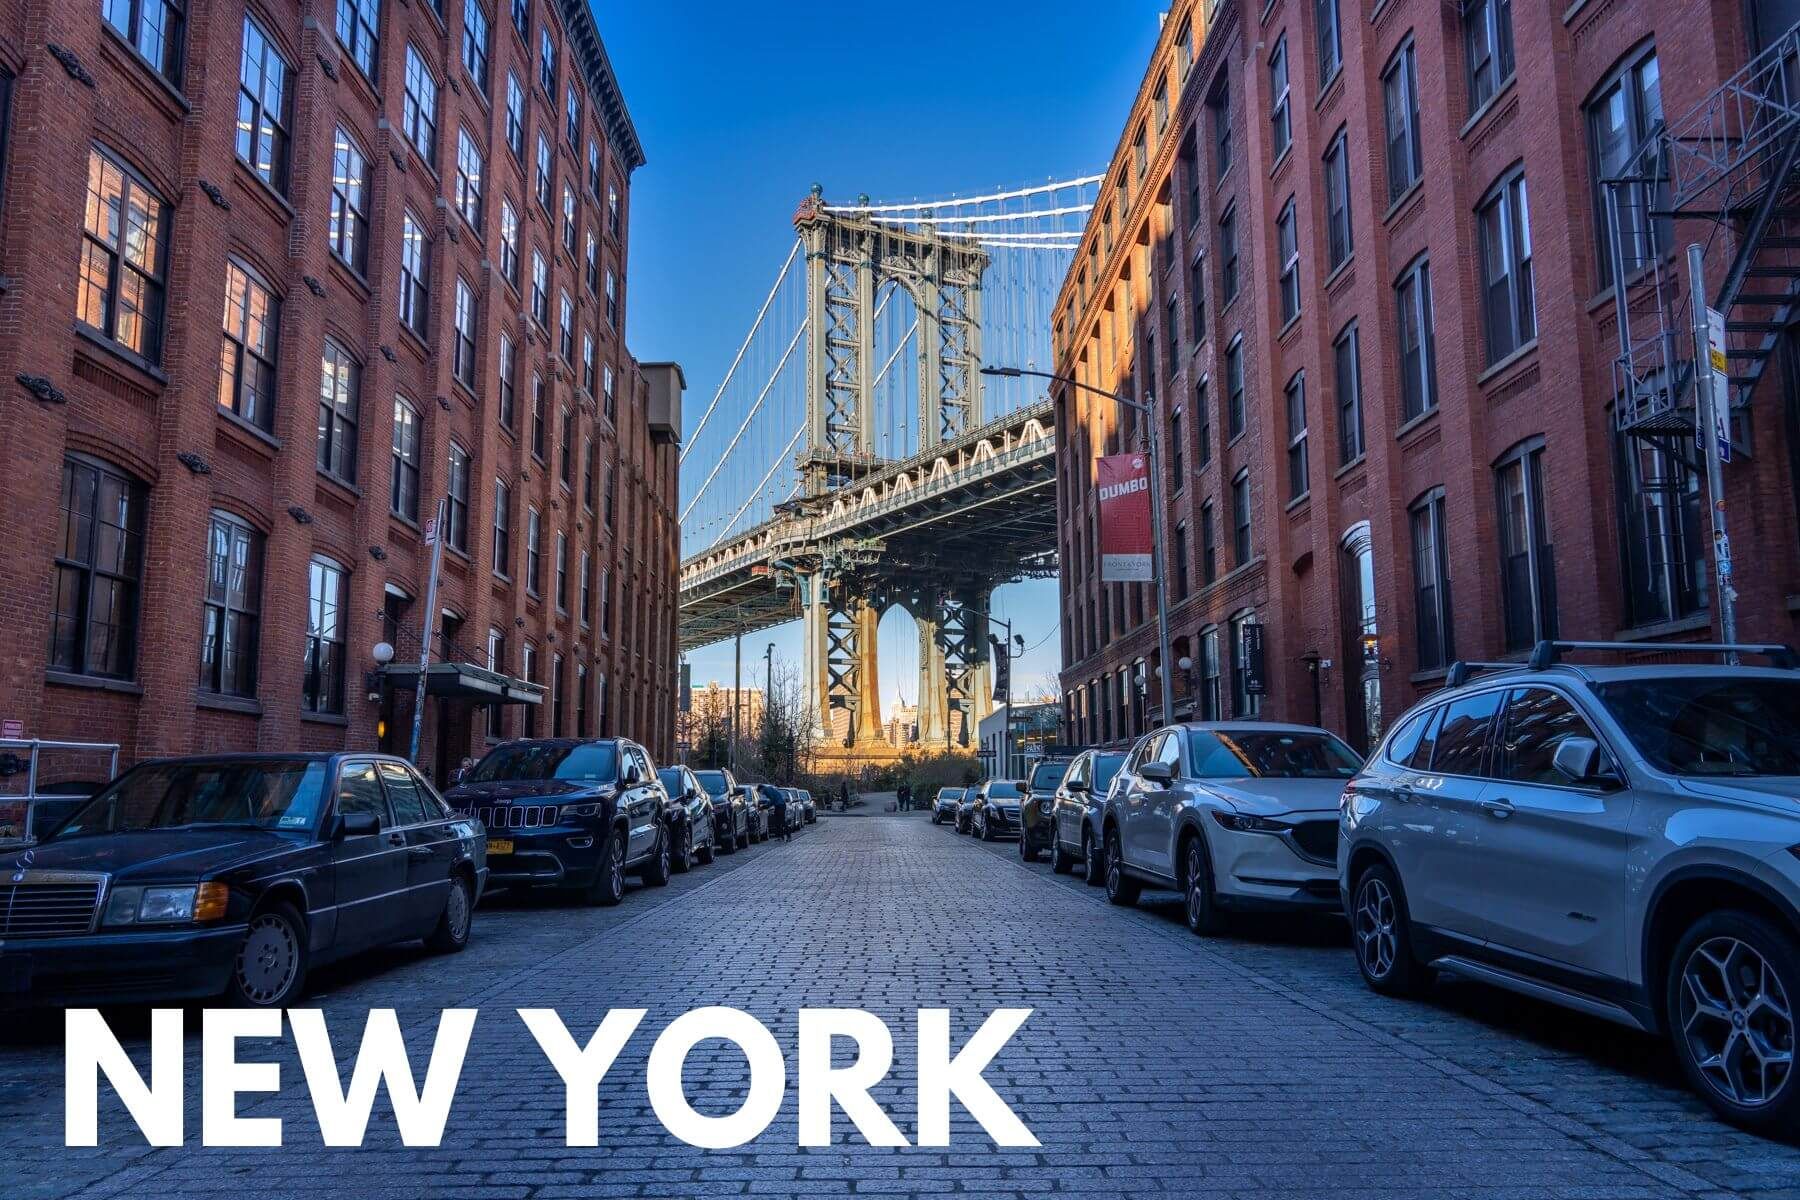 Photo of the Manhattan Bridge in between tall rows of buildings in Brooklyn with the word New York overlaid